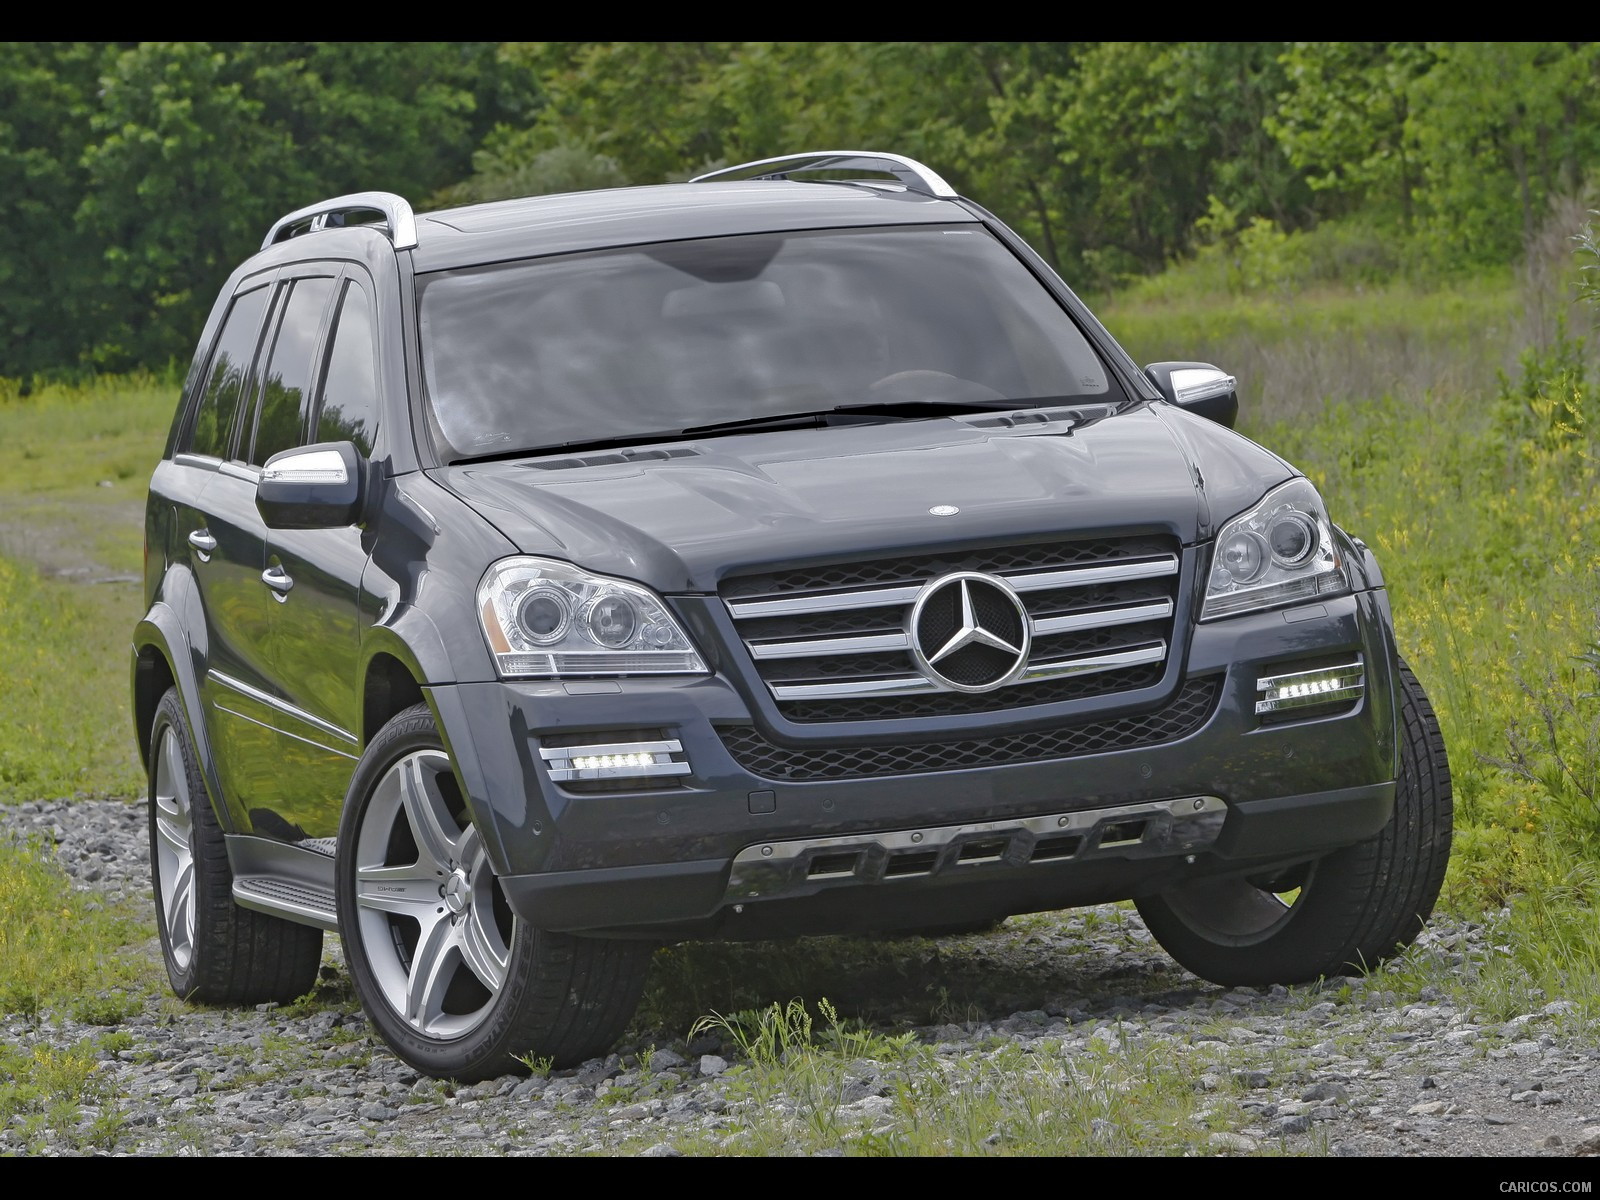 2010 Mercedes-Benz GL550 - Front, #53 of 112